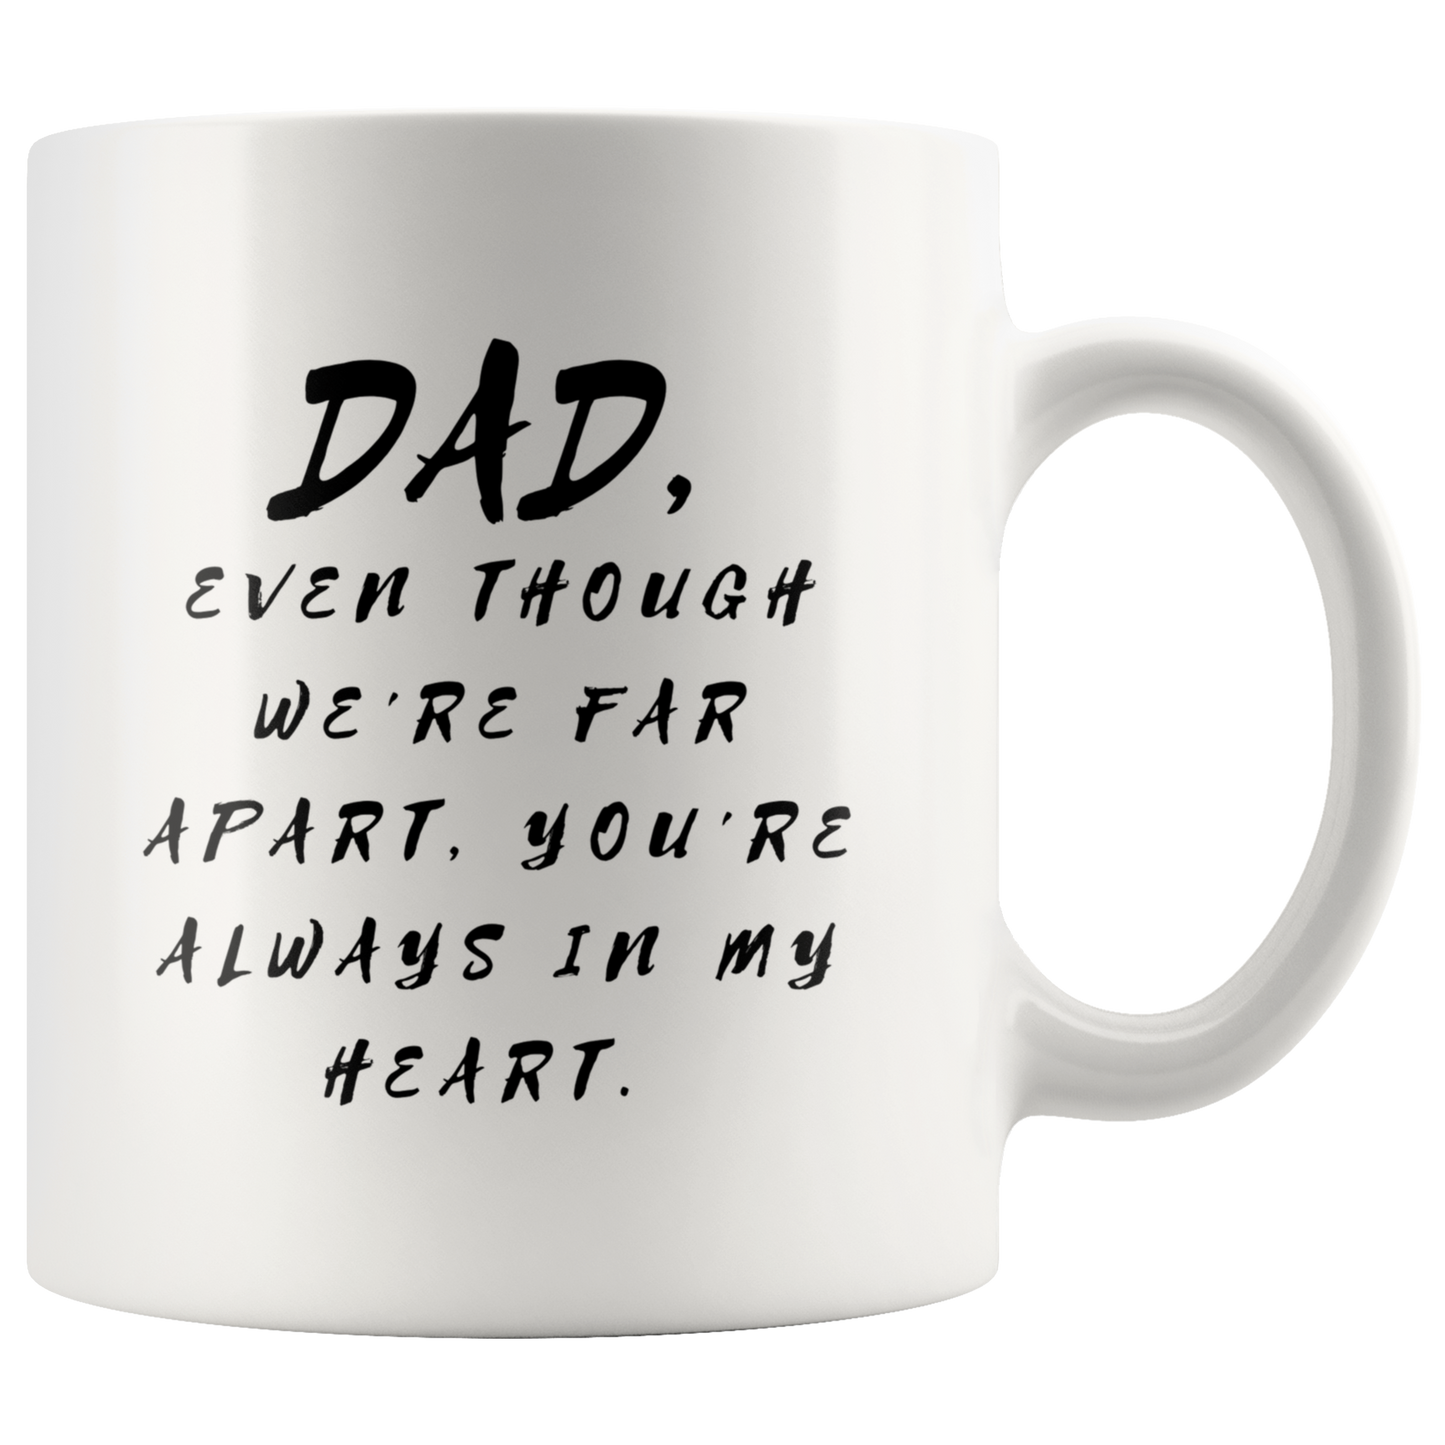 Dad Mug - 'Dad, Even Though We're Far Apart, You're Always in My Heart' (Black) - A great gift for Birthdays, Christmas, Father's Day or anytime!